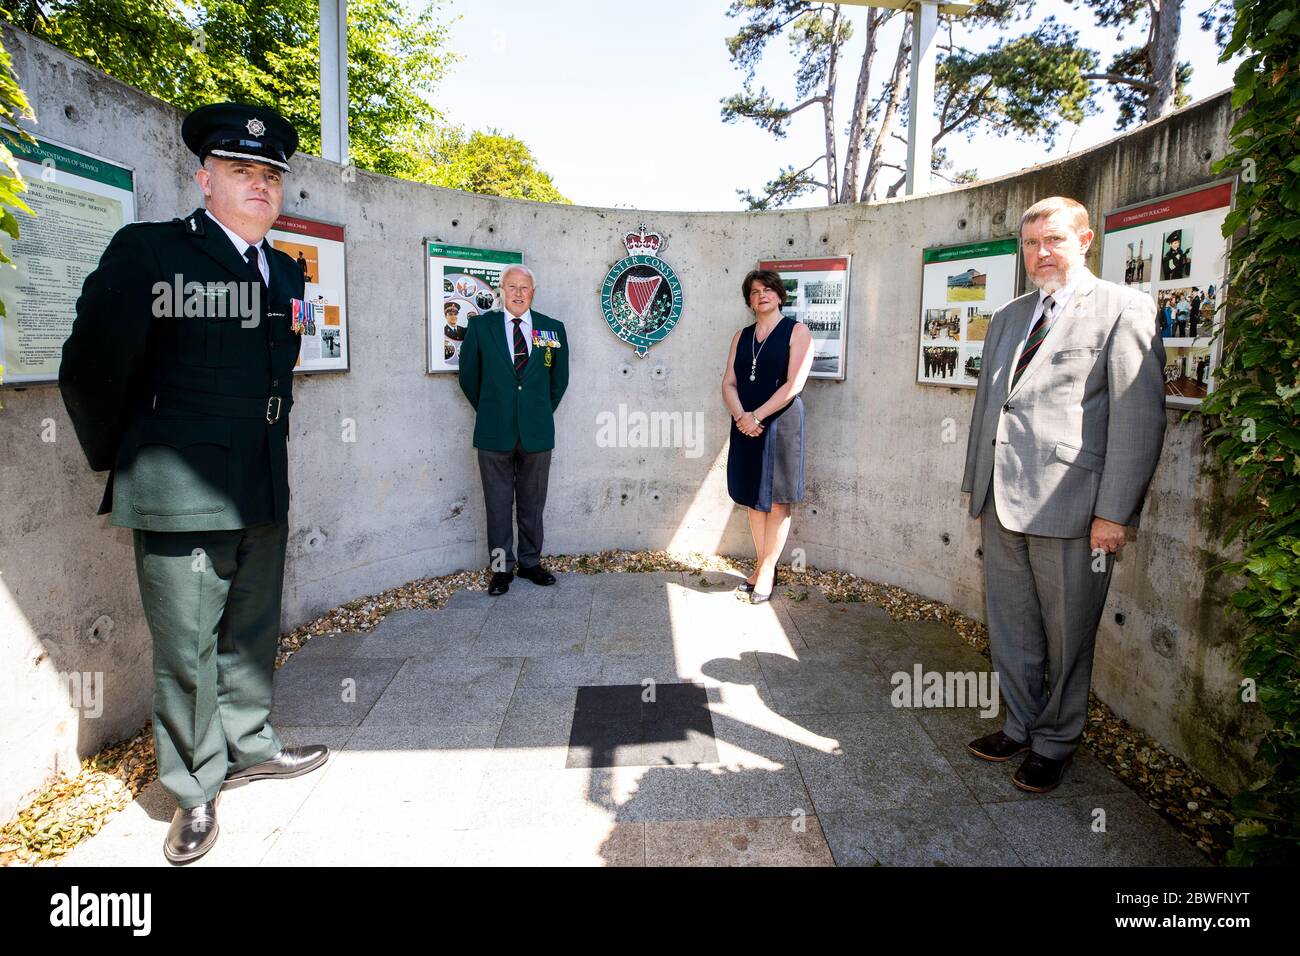 (left to right) Deputy Chief Constable Mark Hamilton, RUC GC Foundation Chairman Stephen White, DUP leader Arlene Foster and DUP MLA and Policing Board member Mervyn Storey, at the Royal Ulster Constabulary Memorial Garden at PSNI Headquarters on Knock Road in Belfast, to mark 50th anniversary of the RUC Reserve. Stock Photo